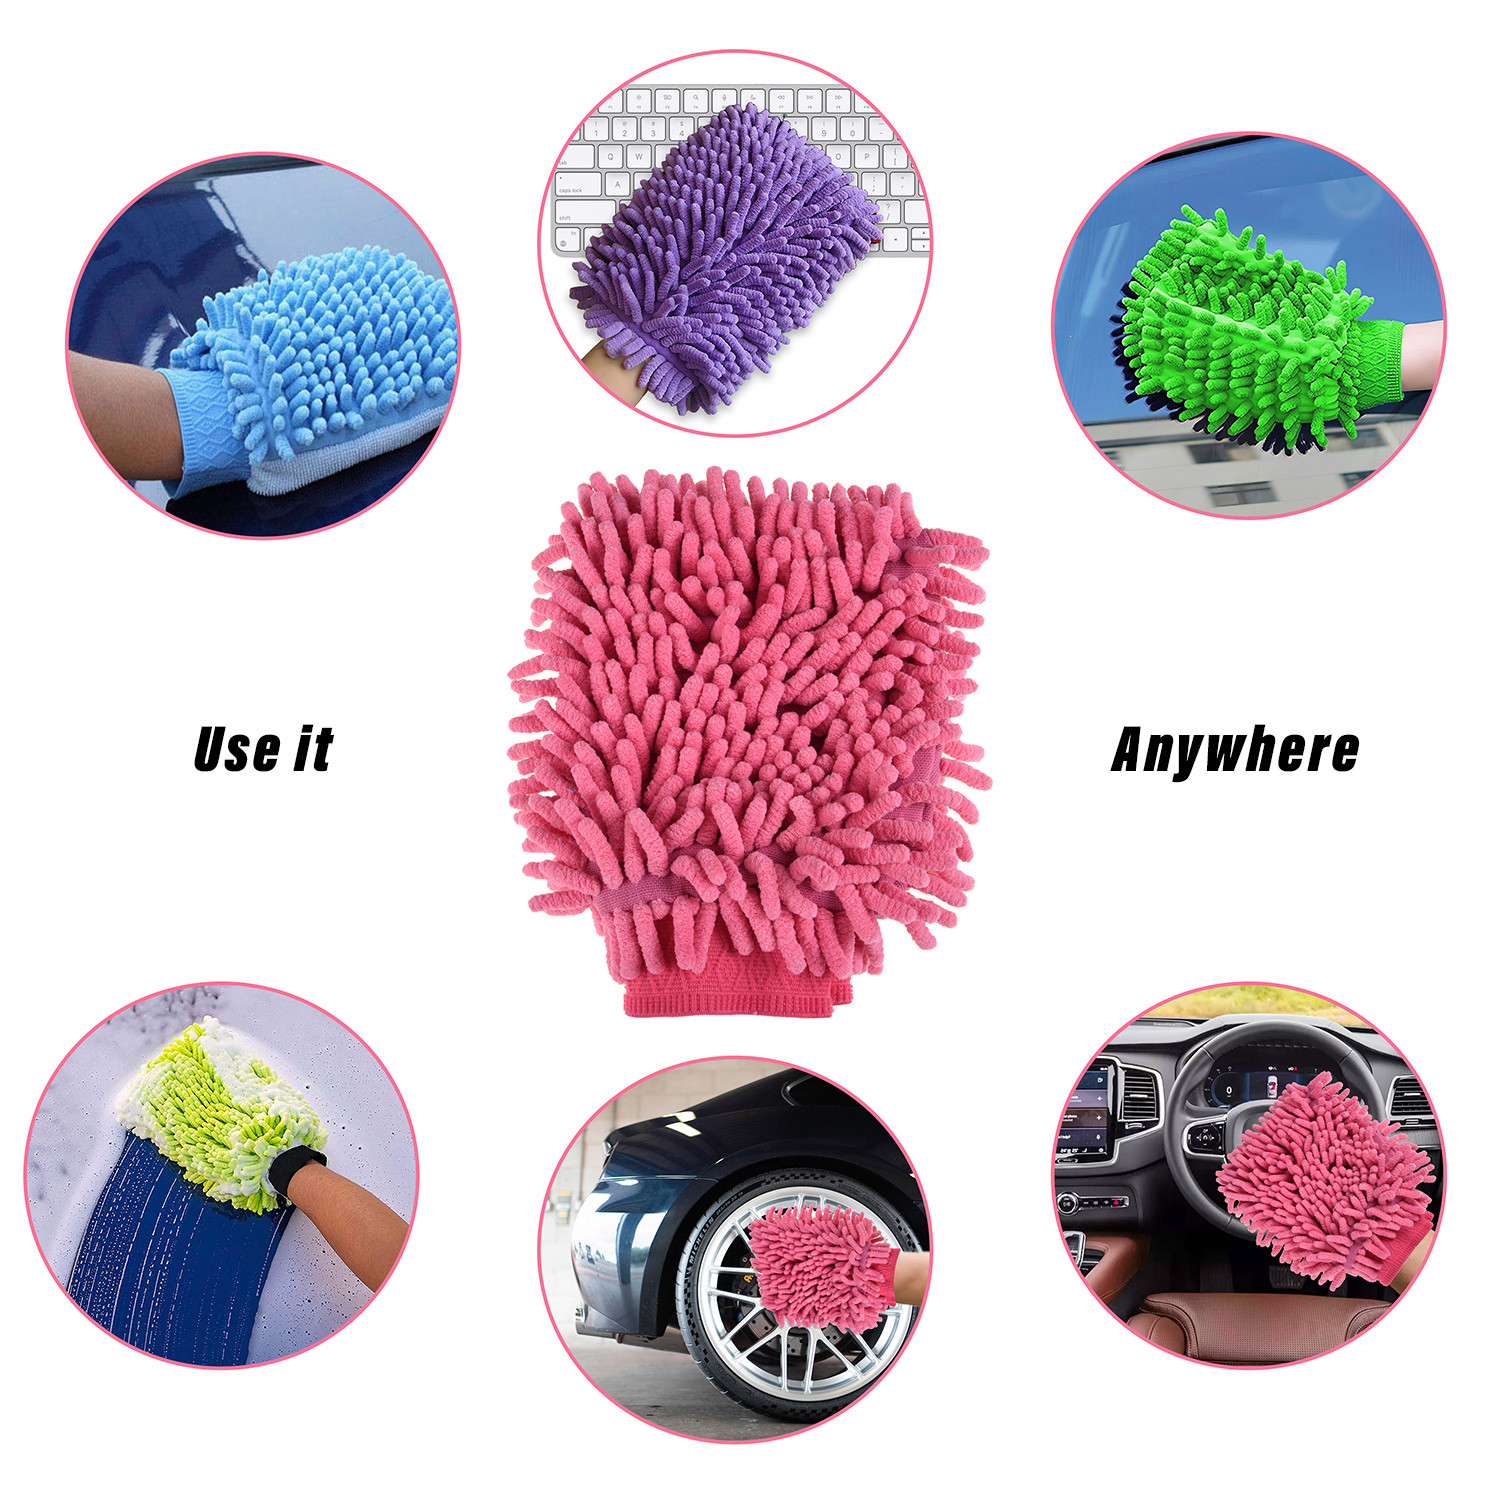 Kuber Industries Chenille Mitts|Microfiber Cleaning Gloves|Inside Waterproof Cloth Gloves|100 Gram Weighted Hand Duster|Chenille Gloves For Car|Glass|Pack of 4 (Multicolor)